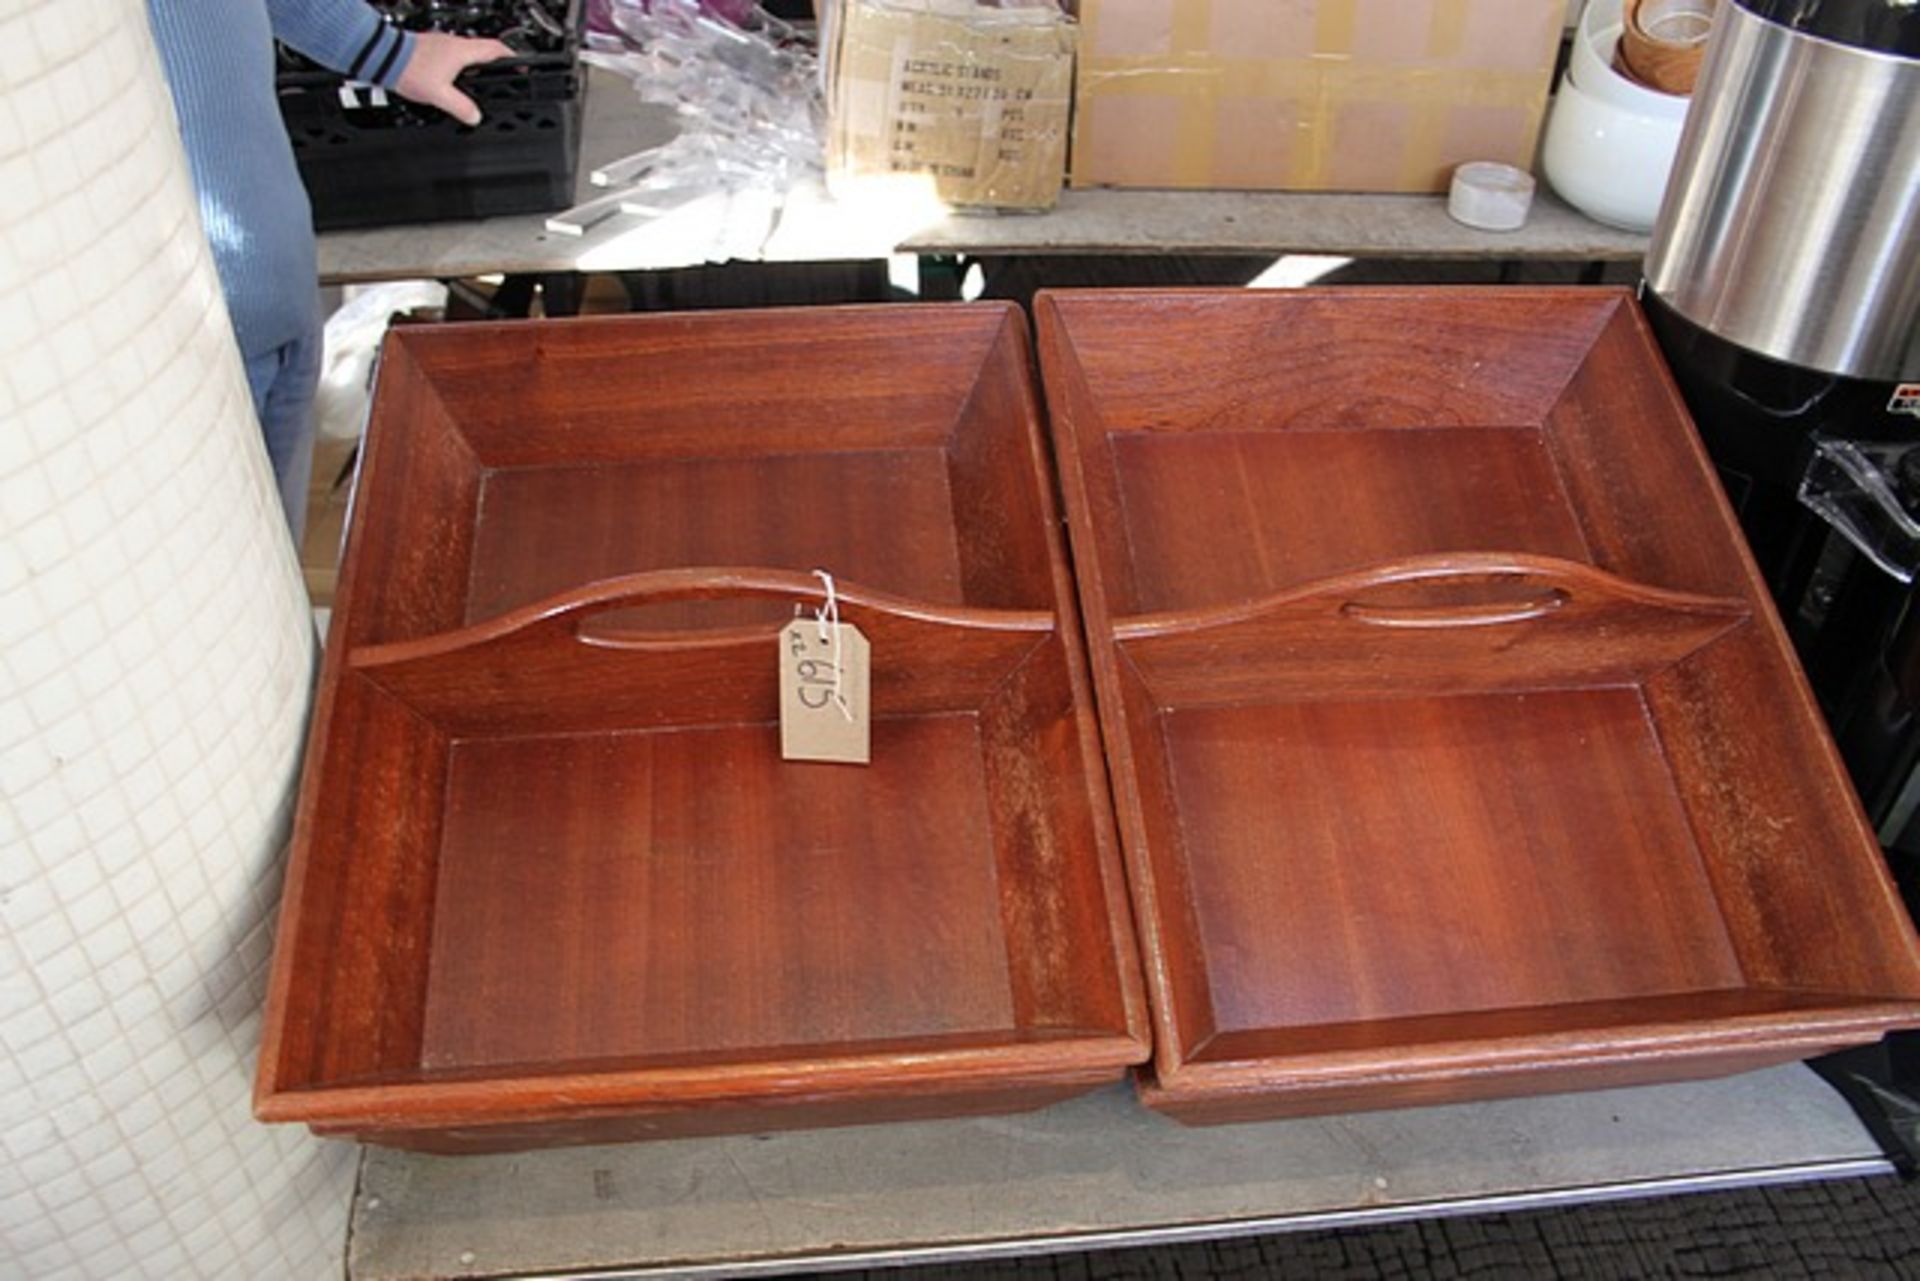 4 x Craster wooden cutlery trays